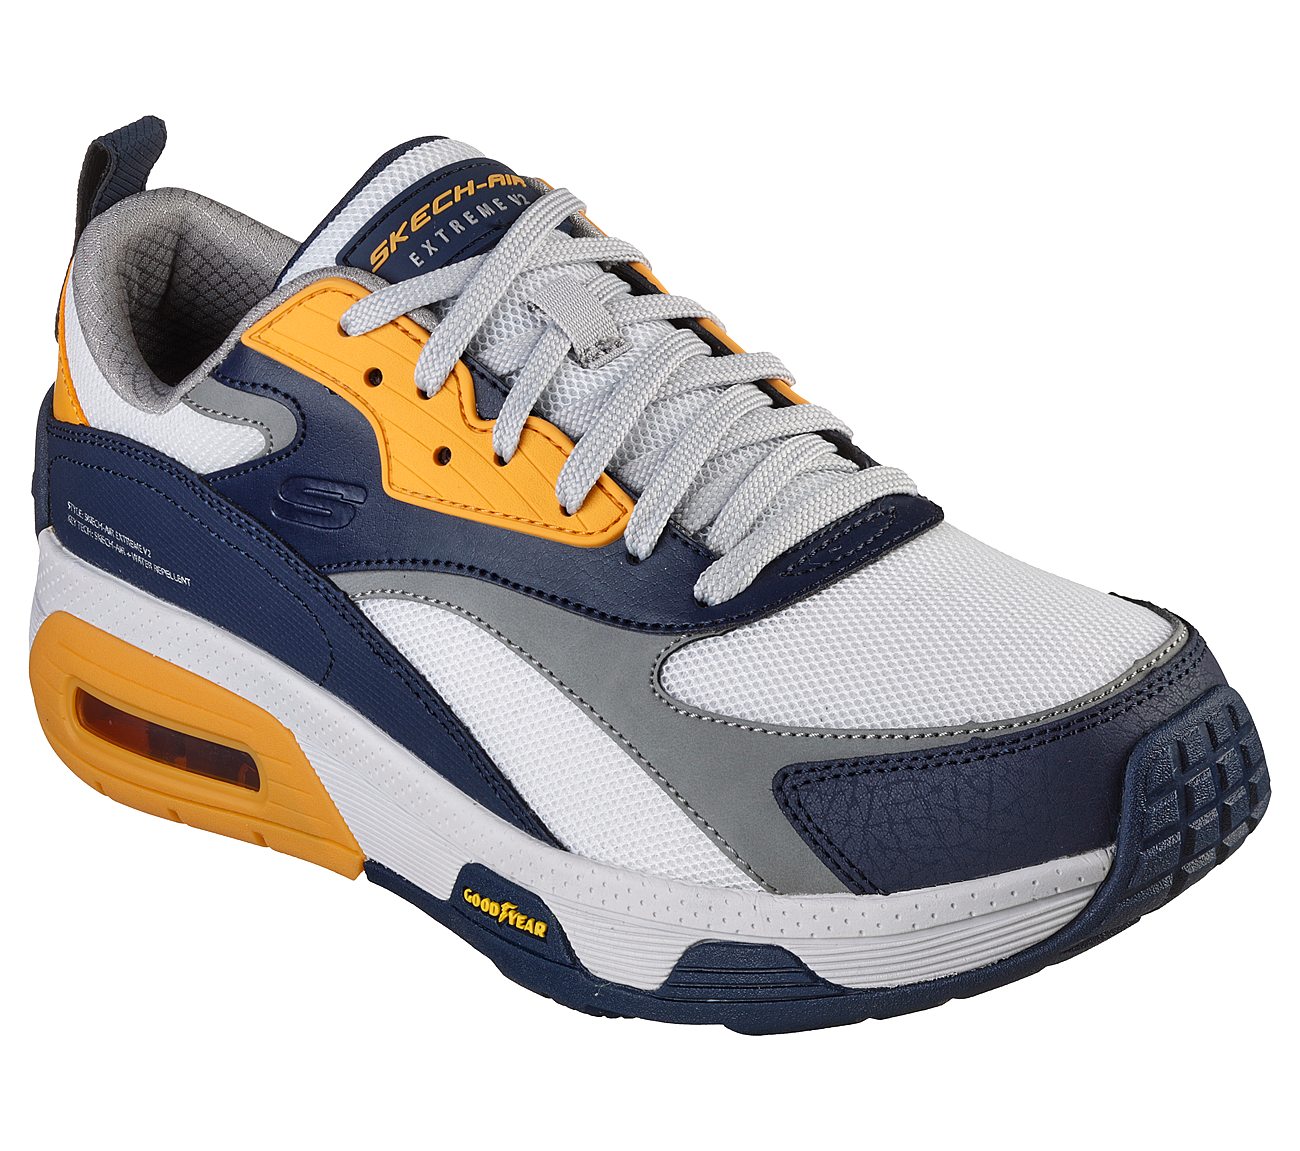 Buy Ultra Go Shoes Collection Online | Skechers India-saigonsouth.com.vn